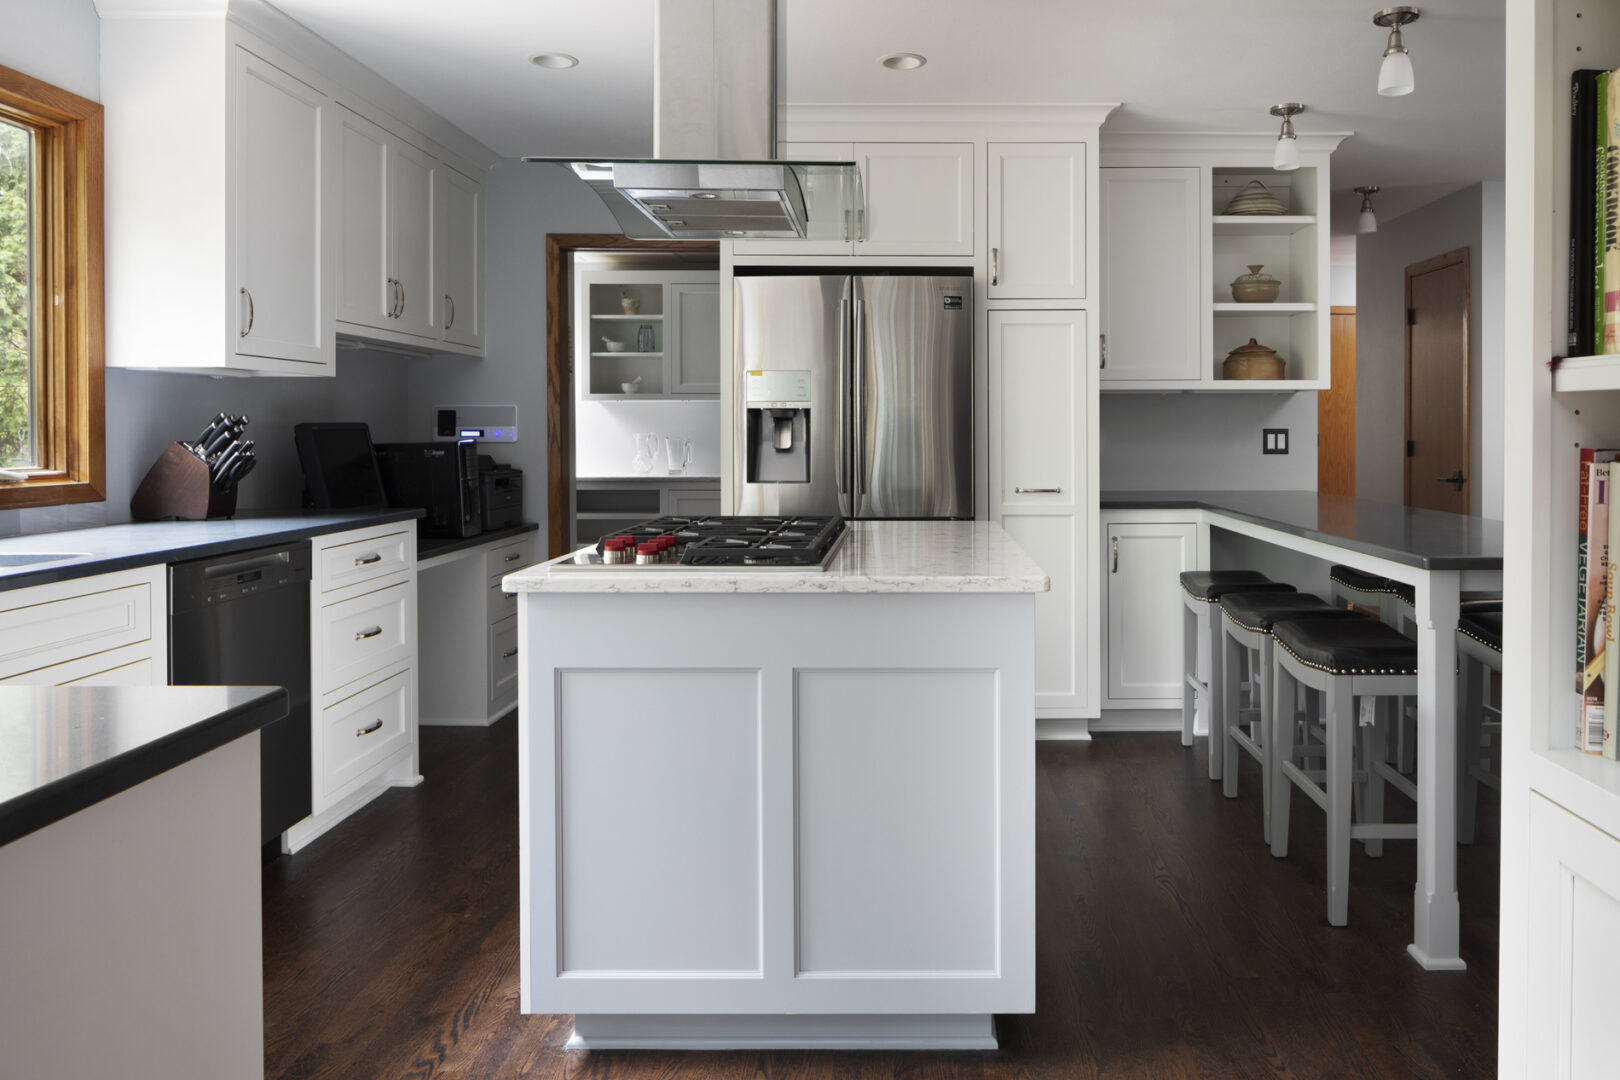 a white kitchen with wooden flooring and a metallic refrigerator